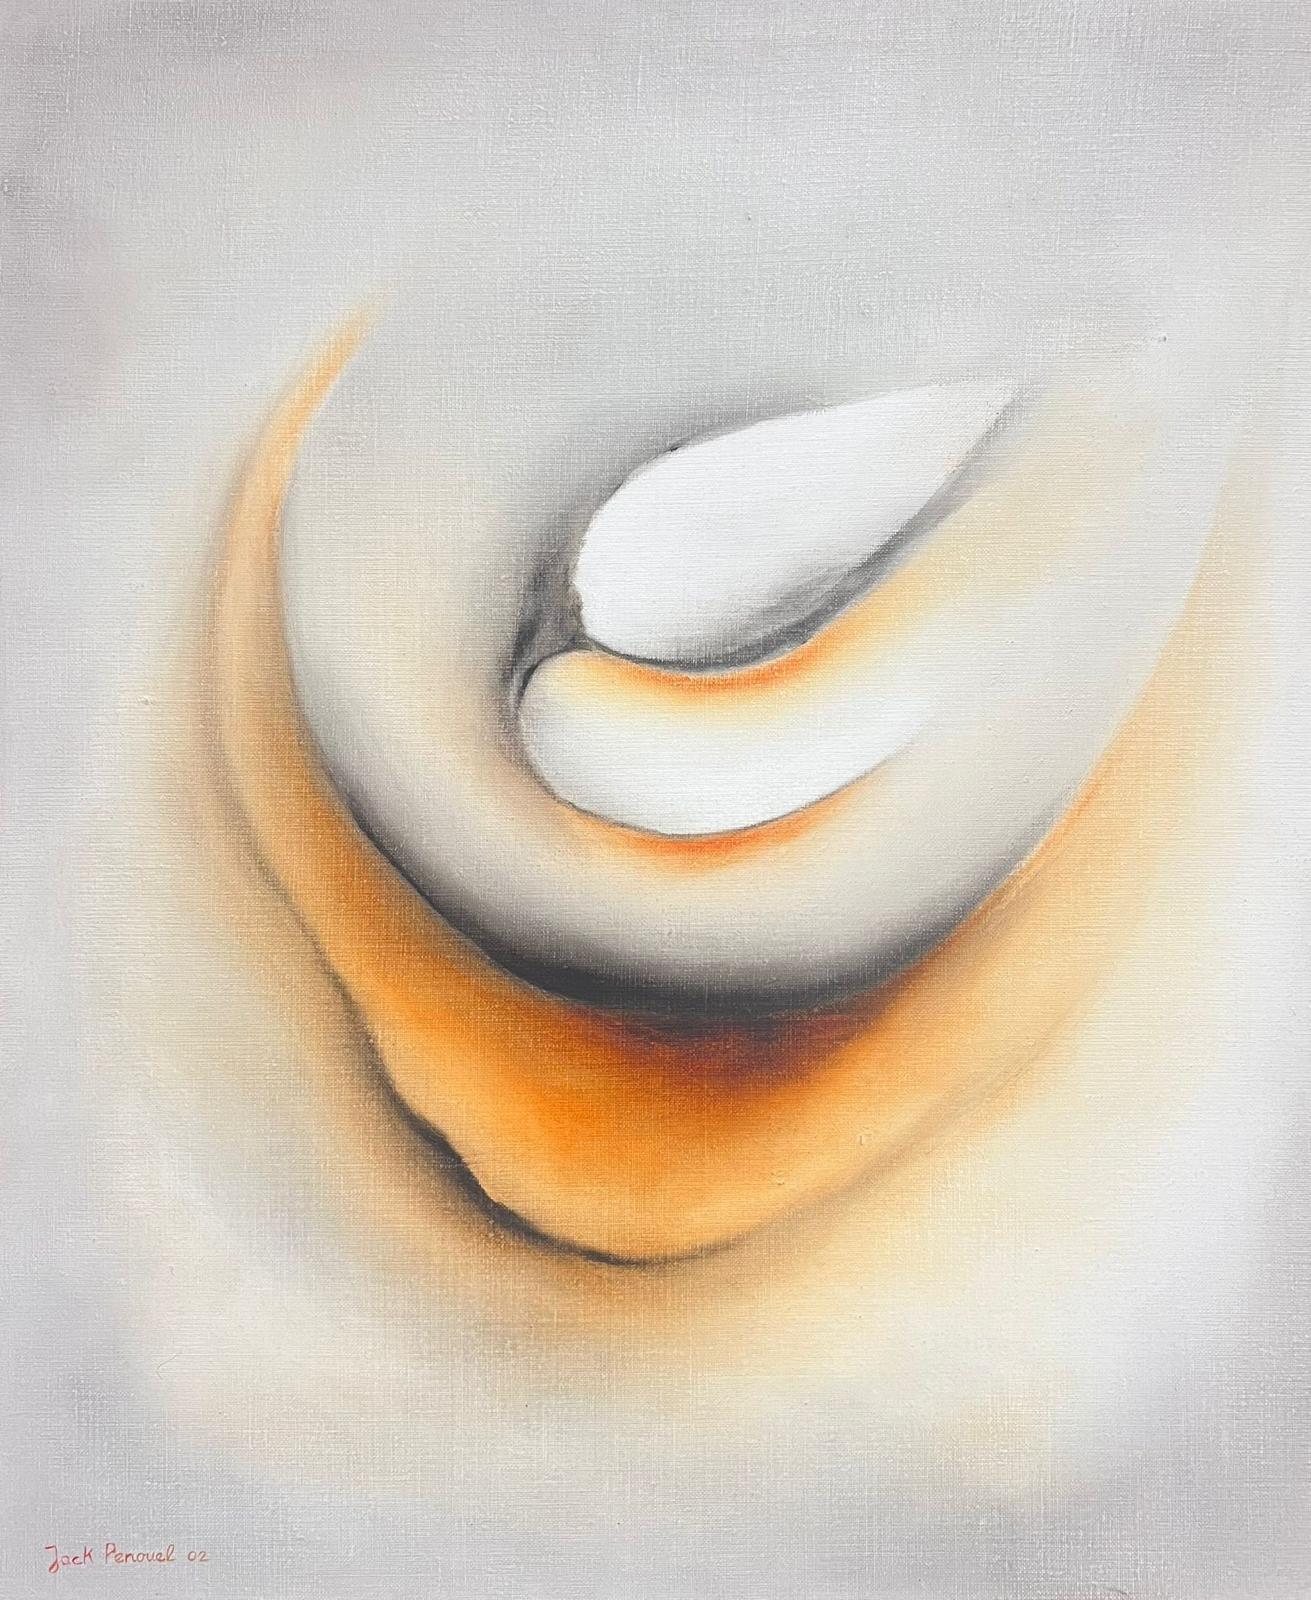 French Surrealist Oil Painting Evolving Shapes and Movement 